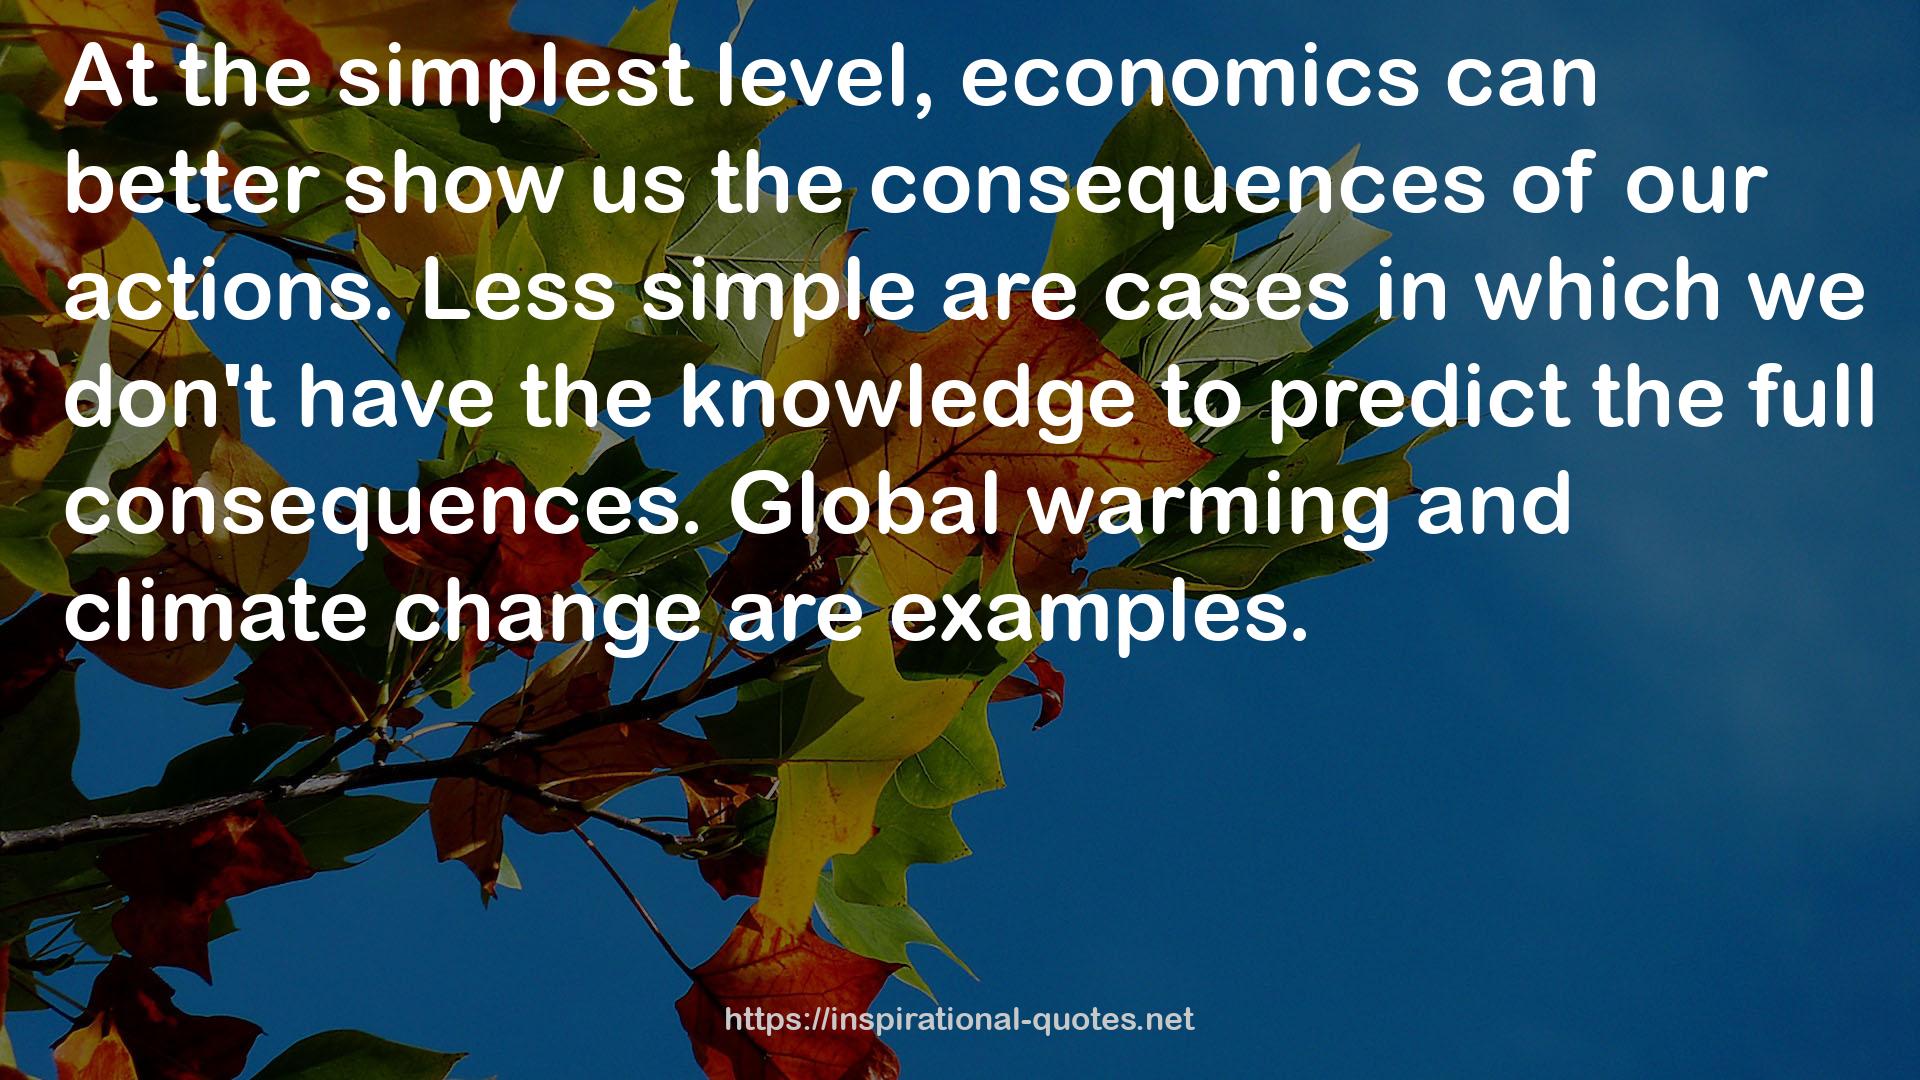 Global warming and climate change  QUOTES